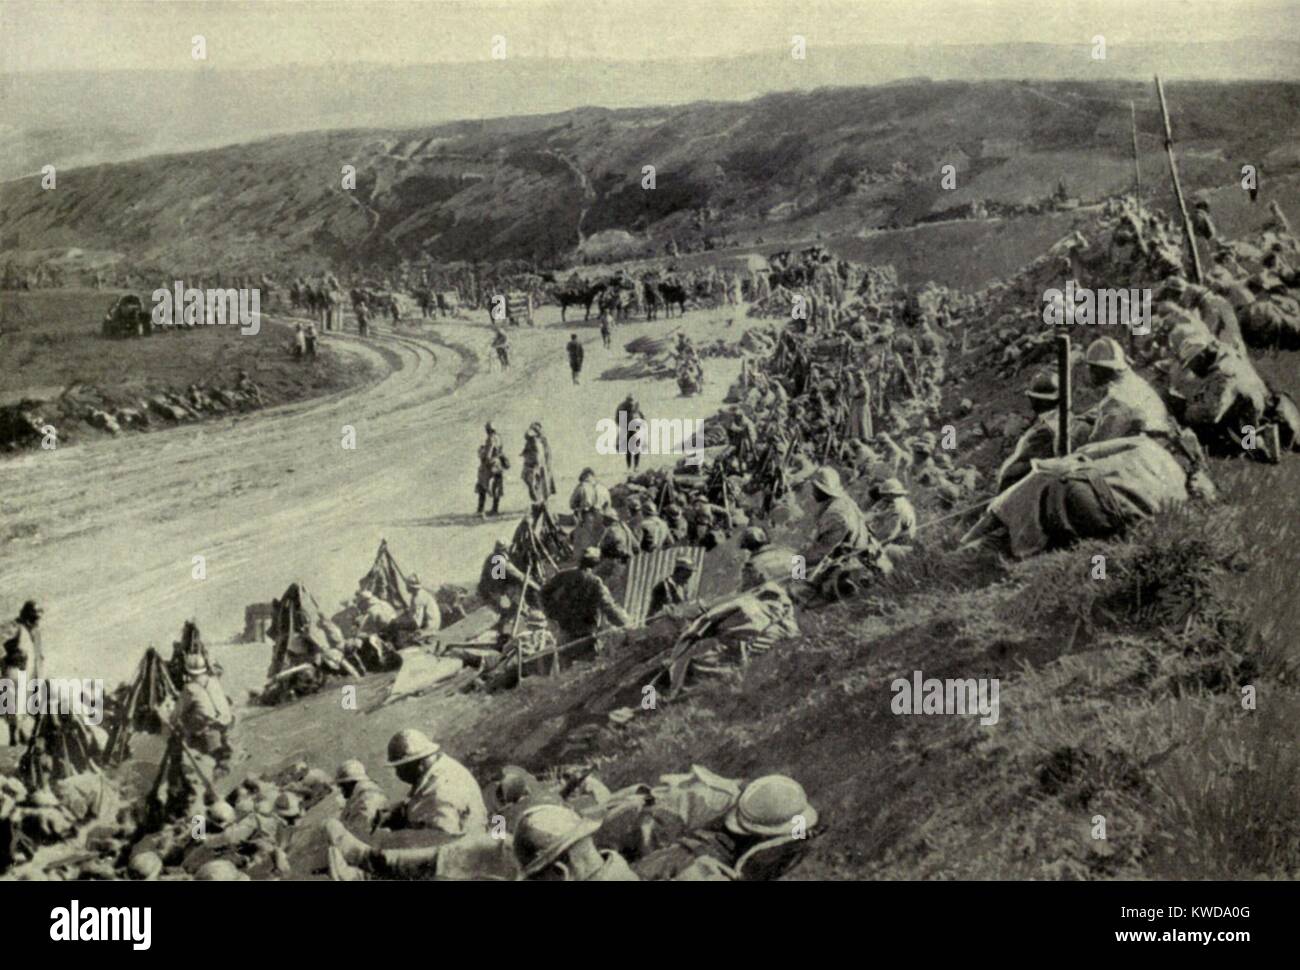 World War 1. Somme Offensive. A concentration of French troops is taking place an hour before the attack on Sailly-Saillisel. The village was won on November 1, 1916, in the last few weeks of the Battle of the Somme. (BSLOC 2013 1 114) Stock Photo